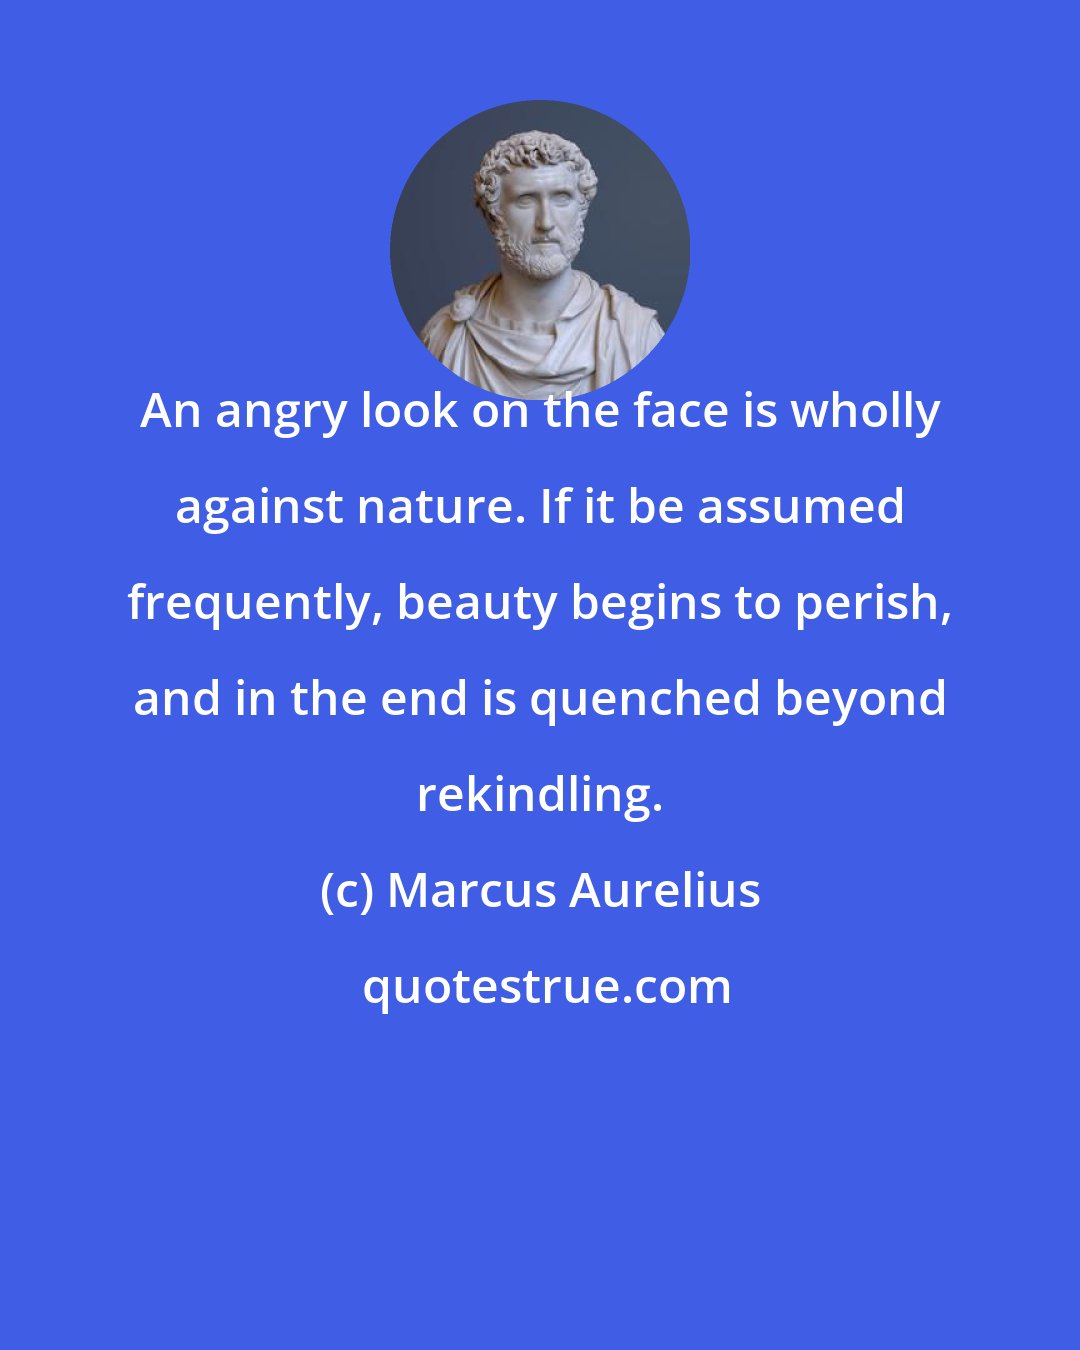 Marcus Aurelius: An angry look on the face is wholly against nature. If it be assumed frequently, beauty begins to perish, and in the end is quenched beyond rekindling.